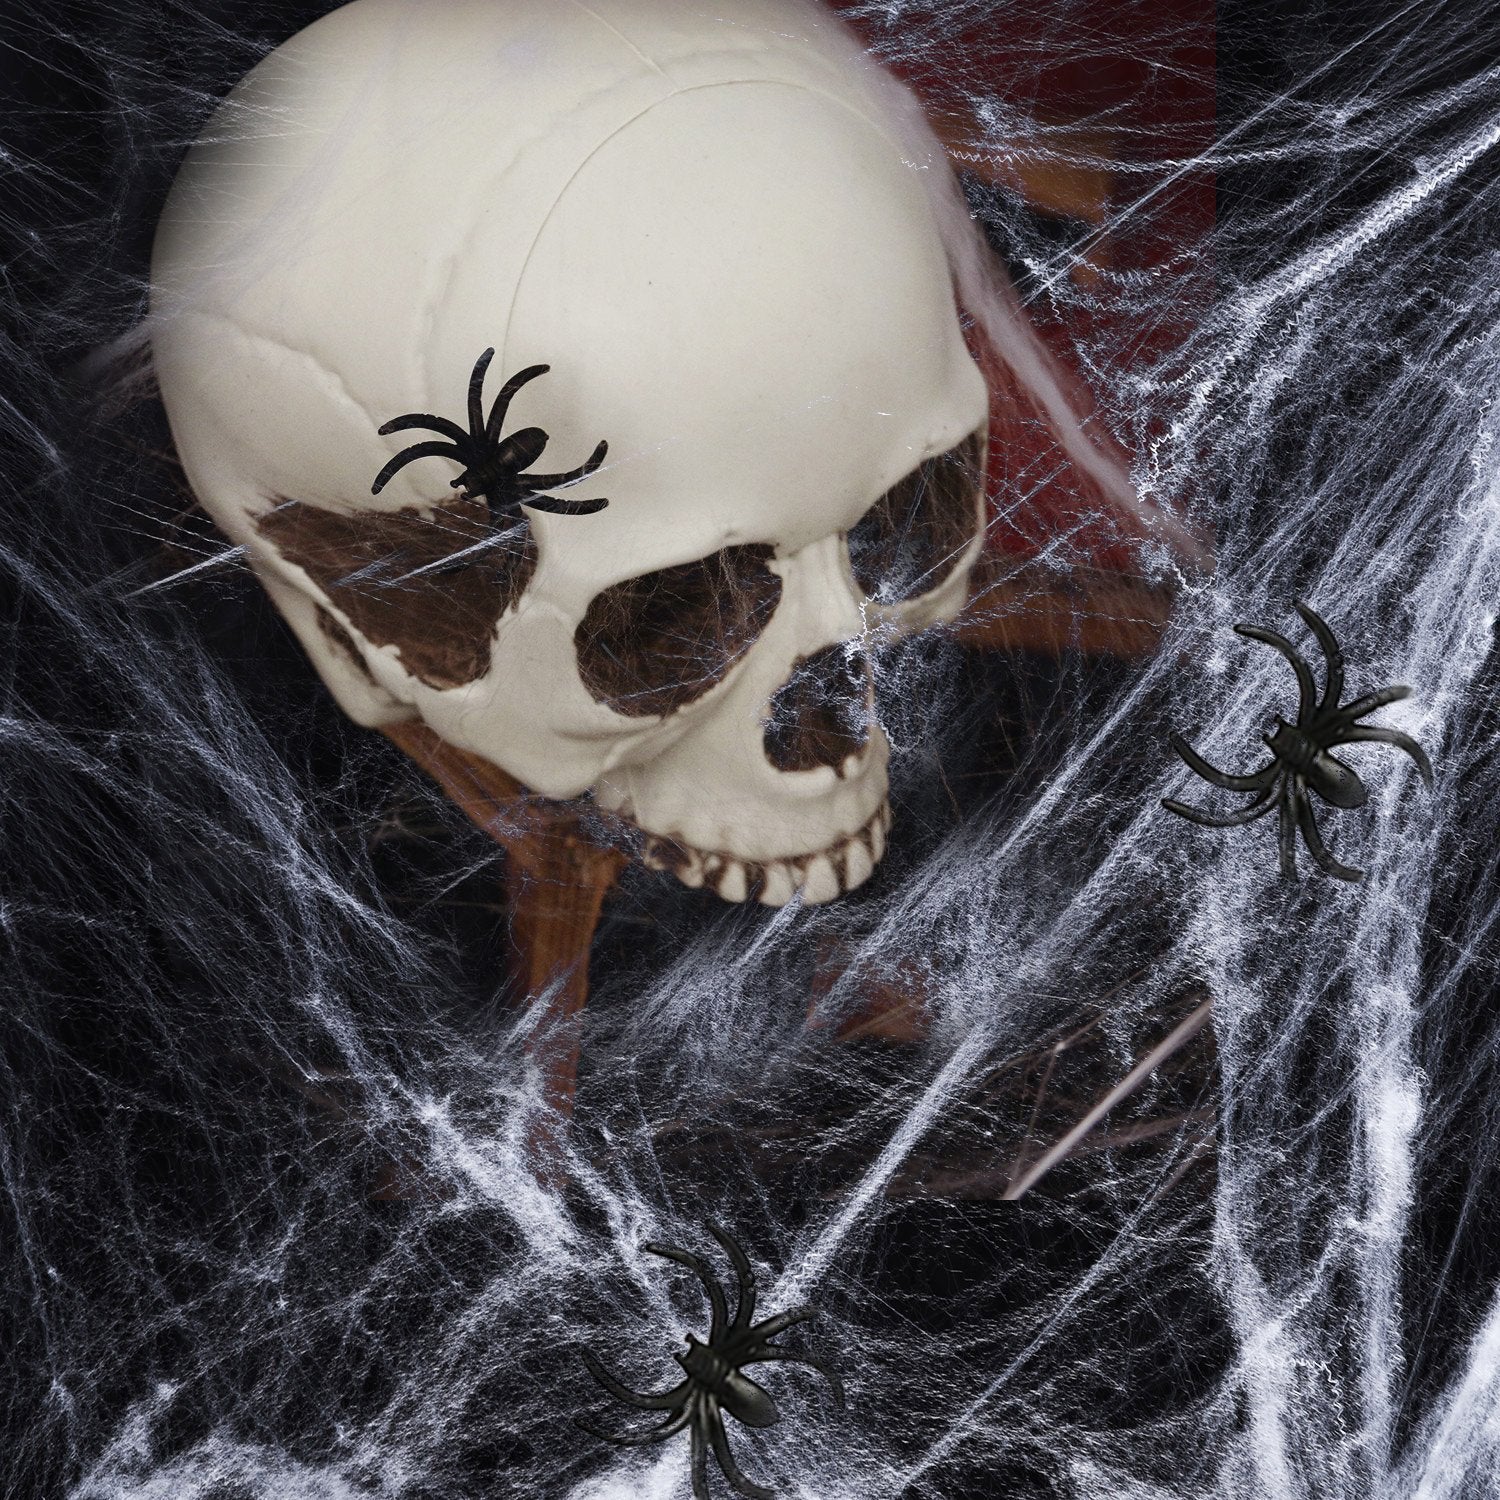 AOSTAR Halloween Stretch Spider Webs Indoor & Outdoor Spooky Spider Webbing with 50 Fake Spiders for Halloween Decorations